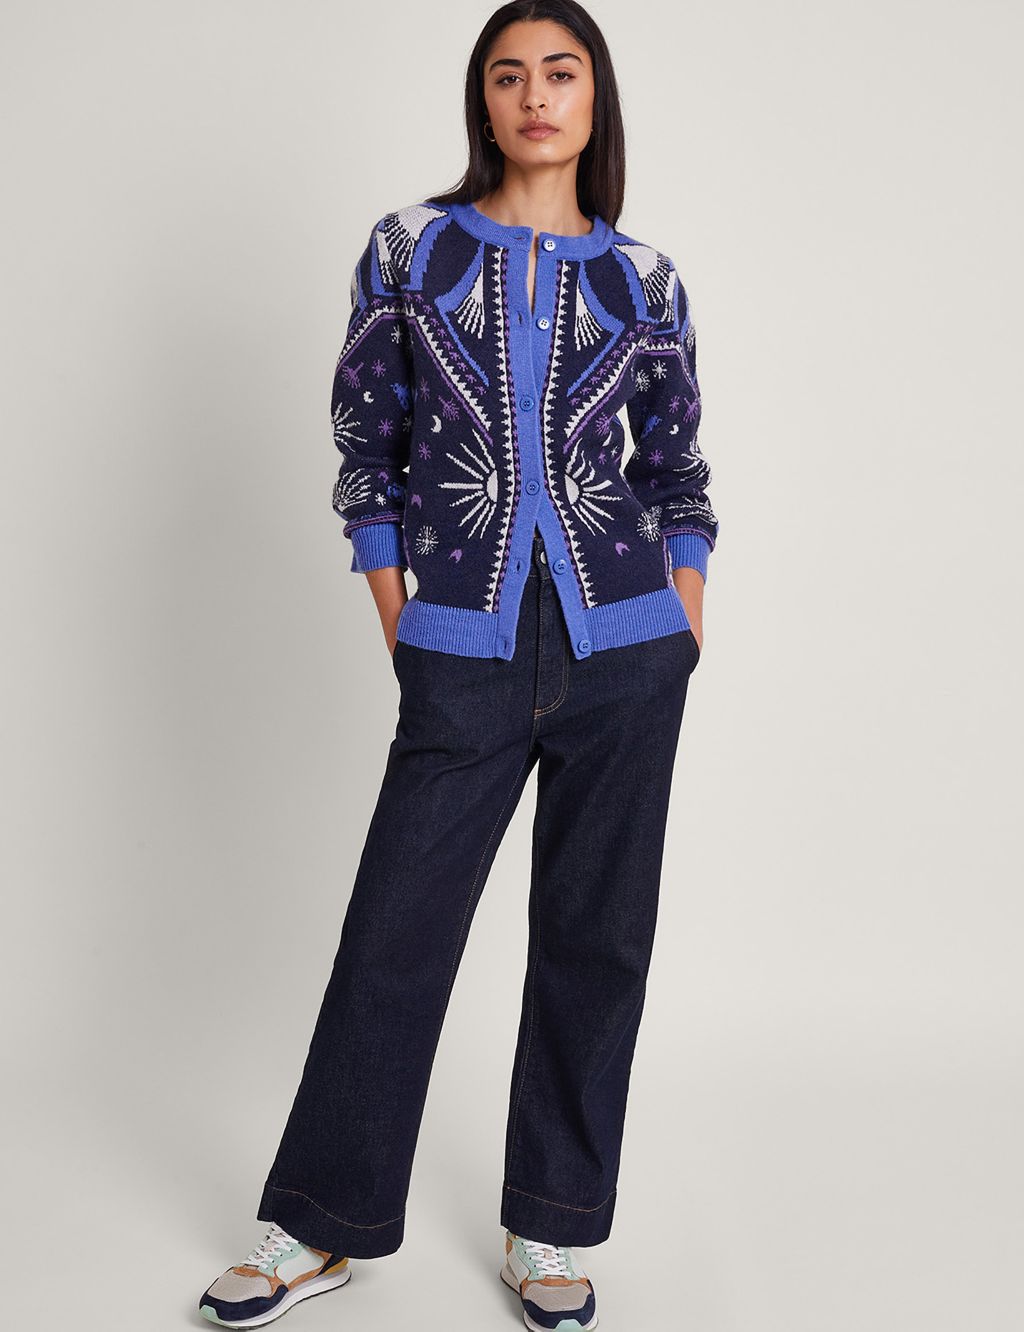 Sun and Moon Patterned Crew Neck Cardigan image 4